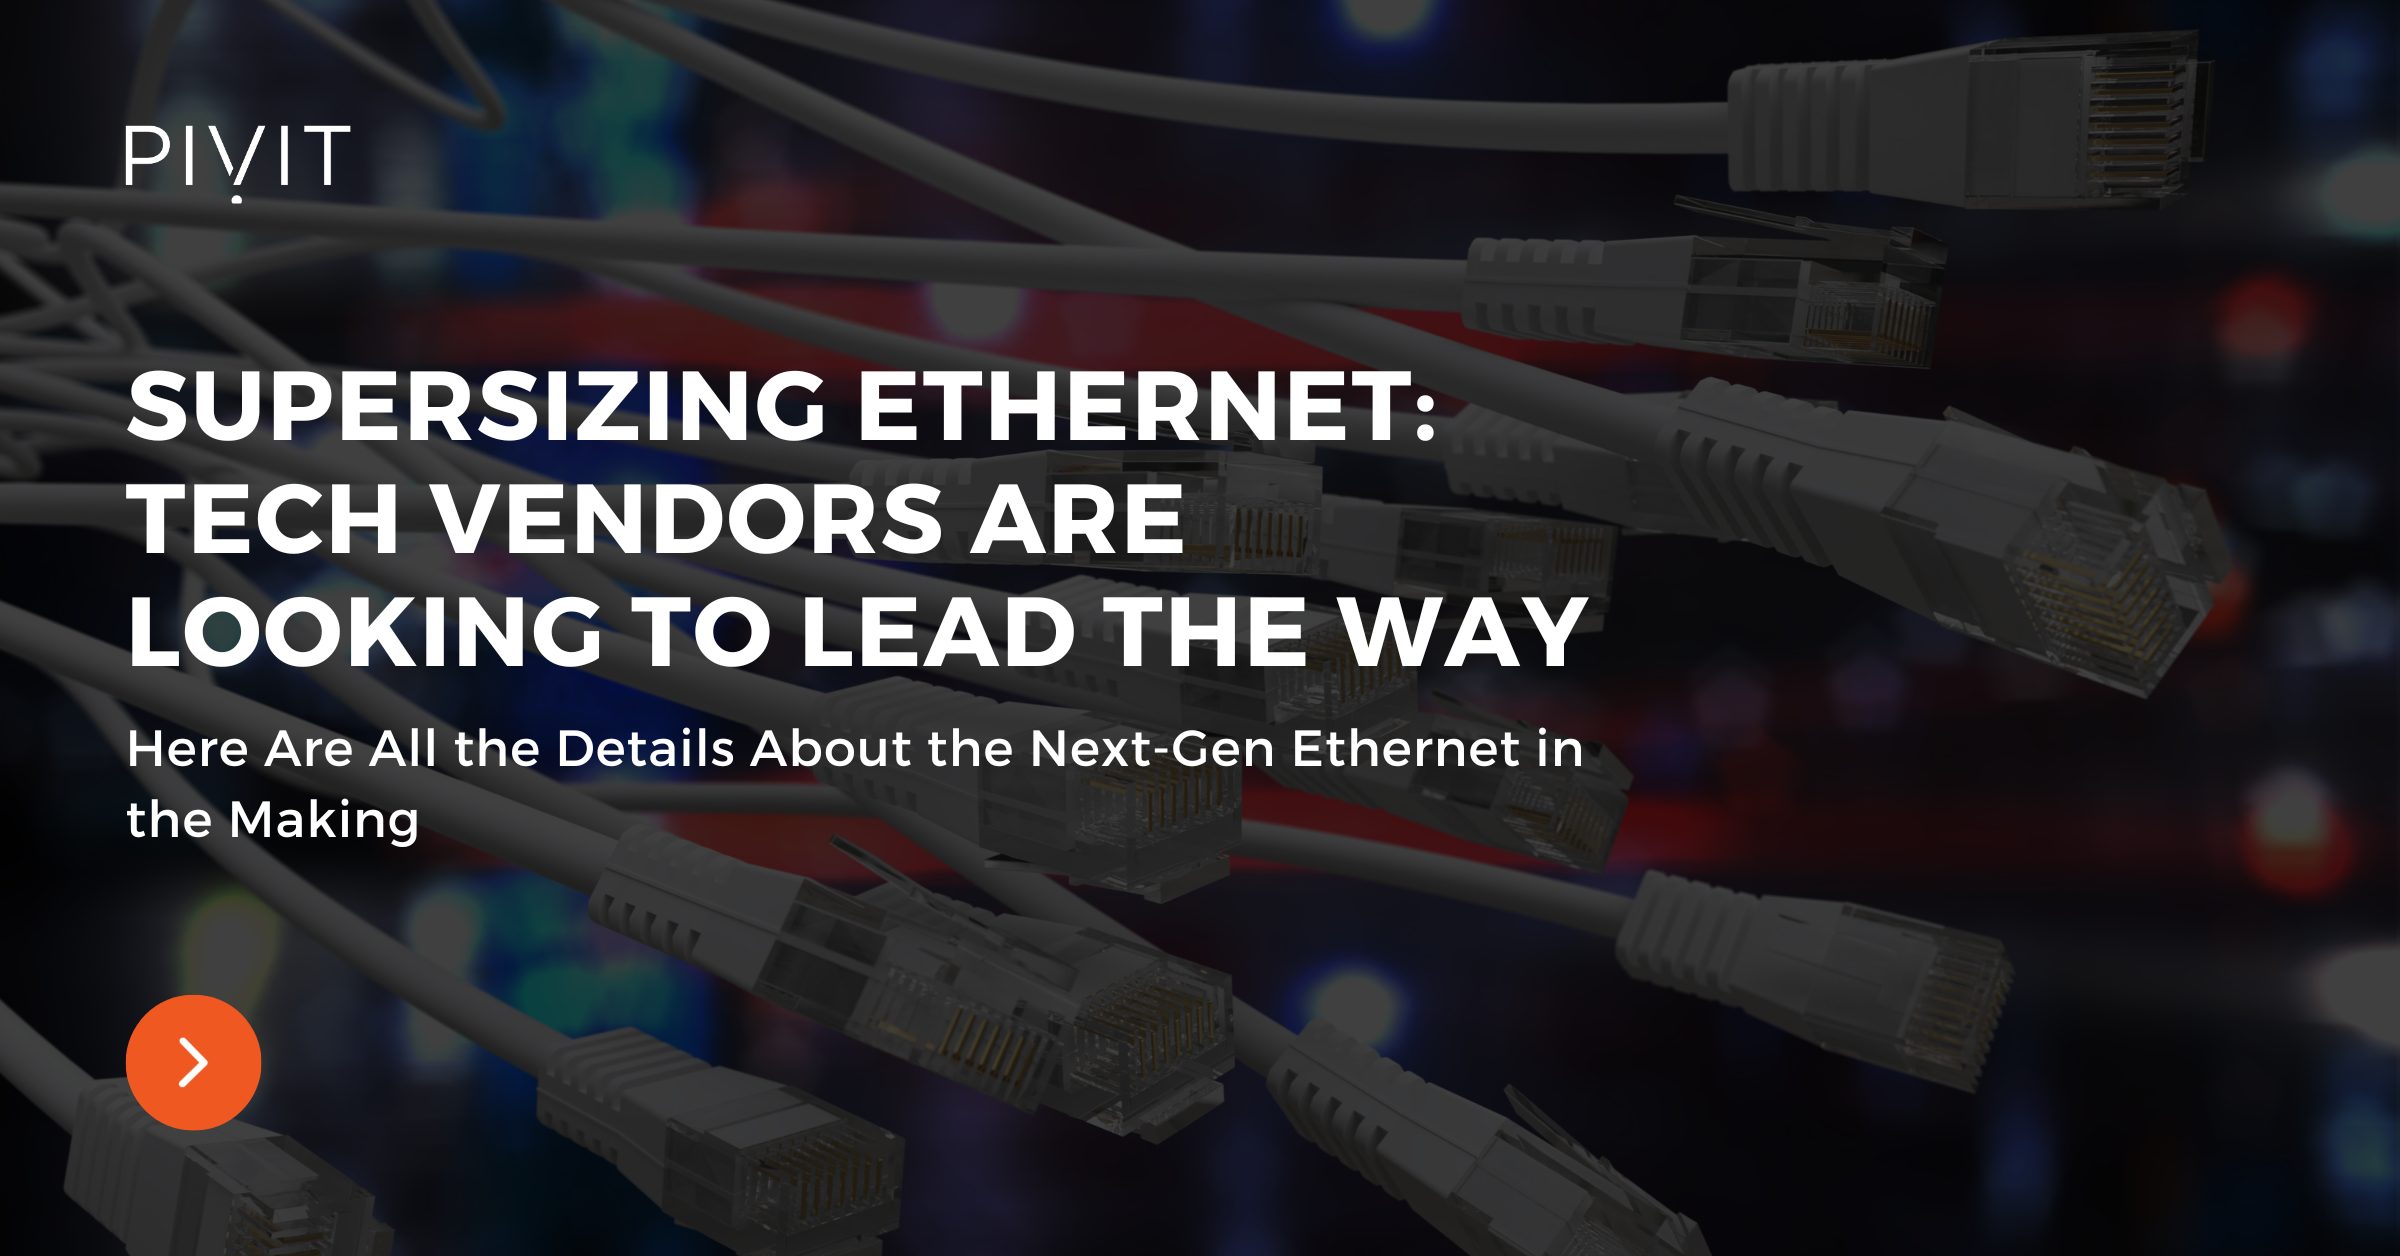 Supersizing Ethernet: Tech Vendors Are Looking To Lead the Way